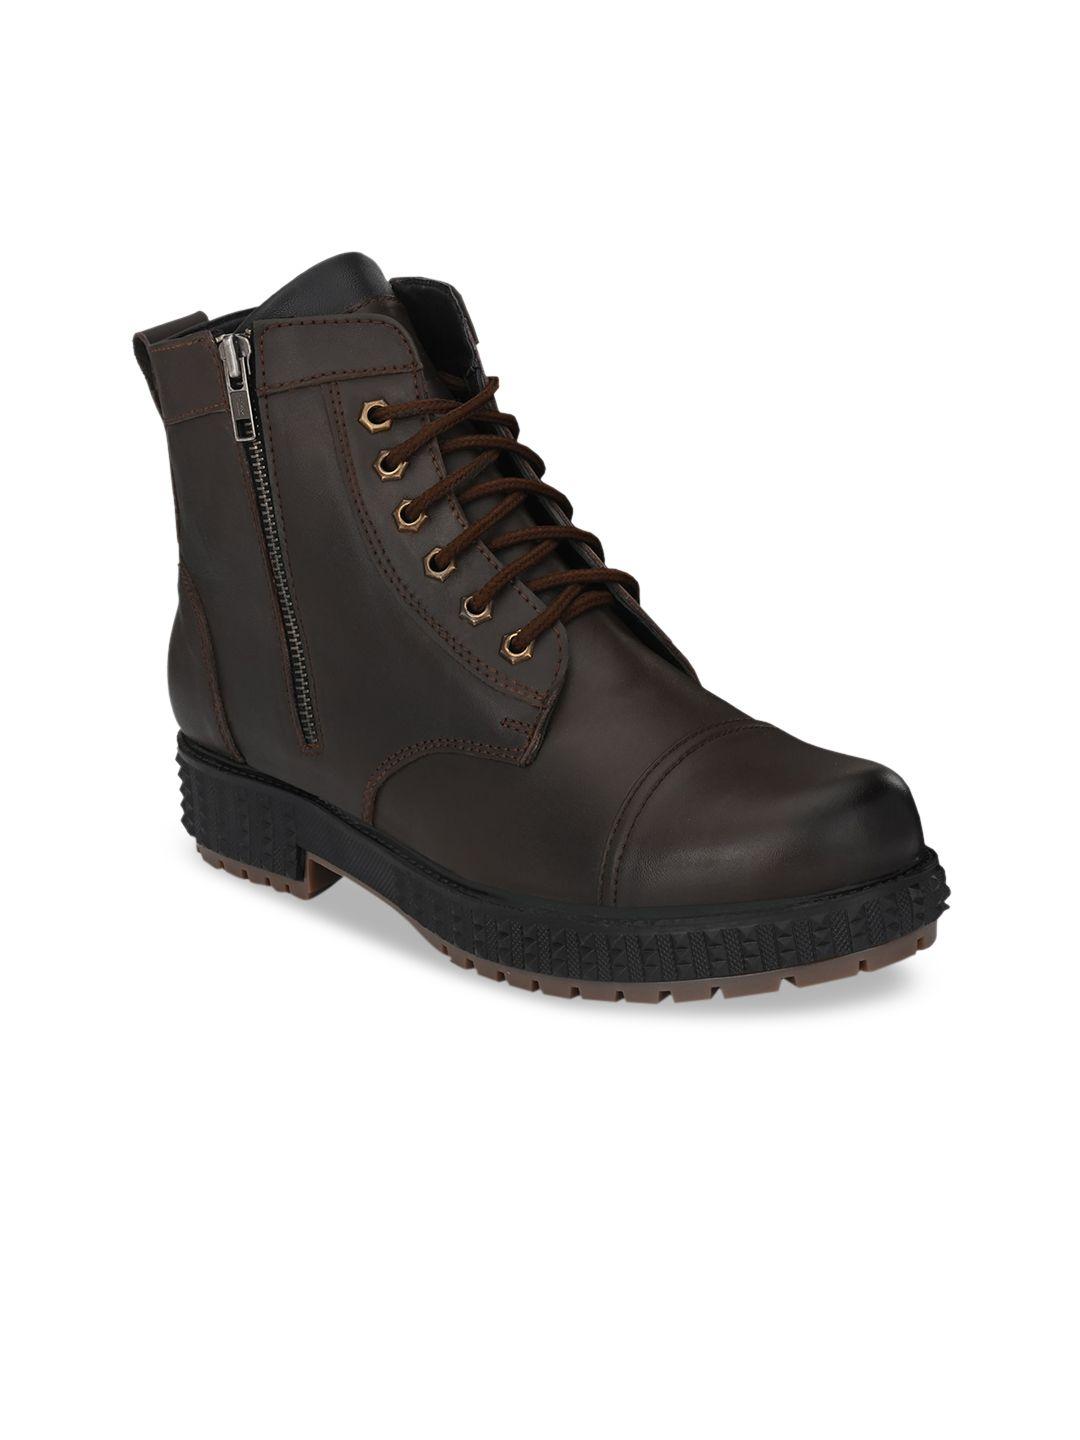 eego italy men brown solid mid-top leather flat boots